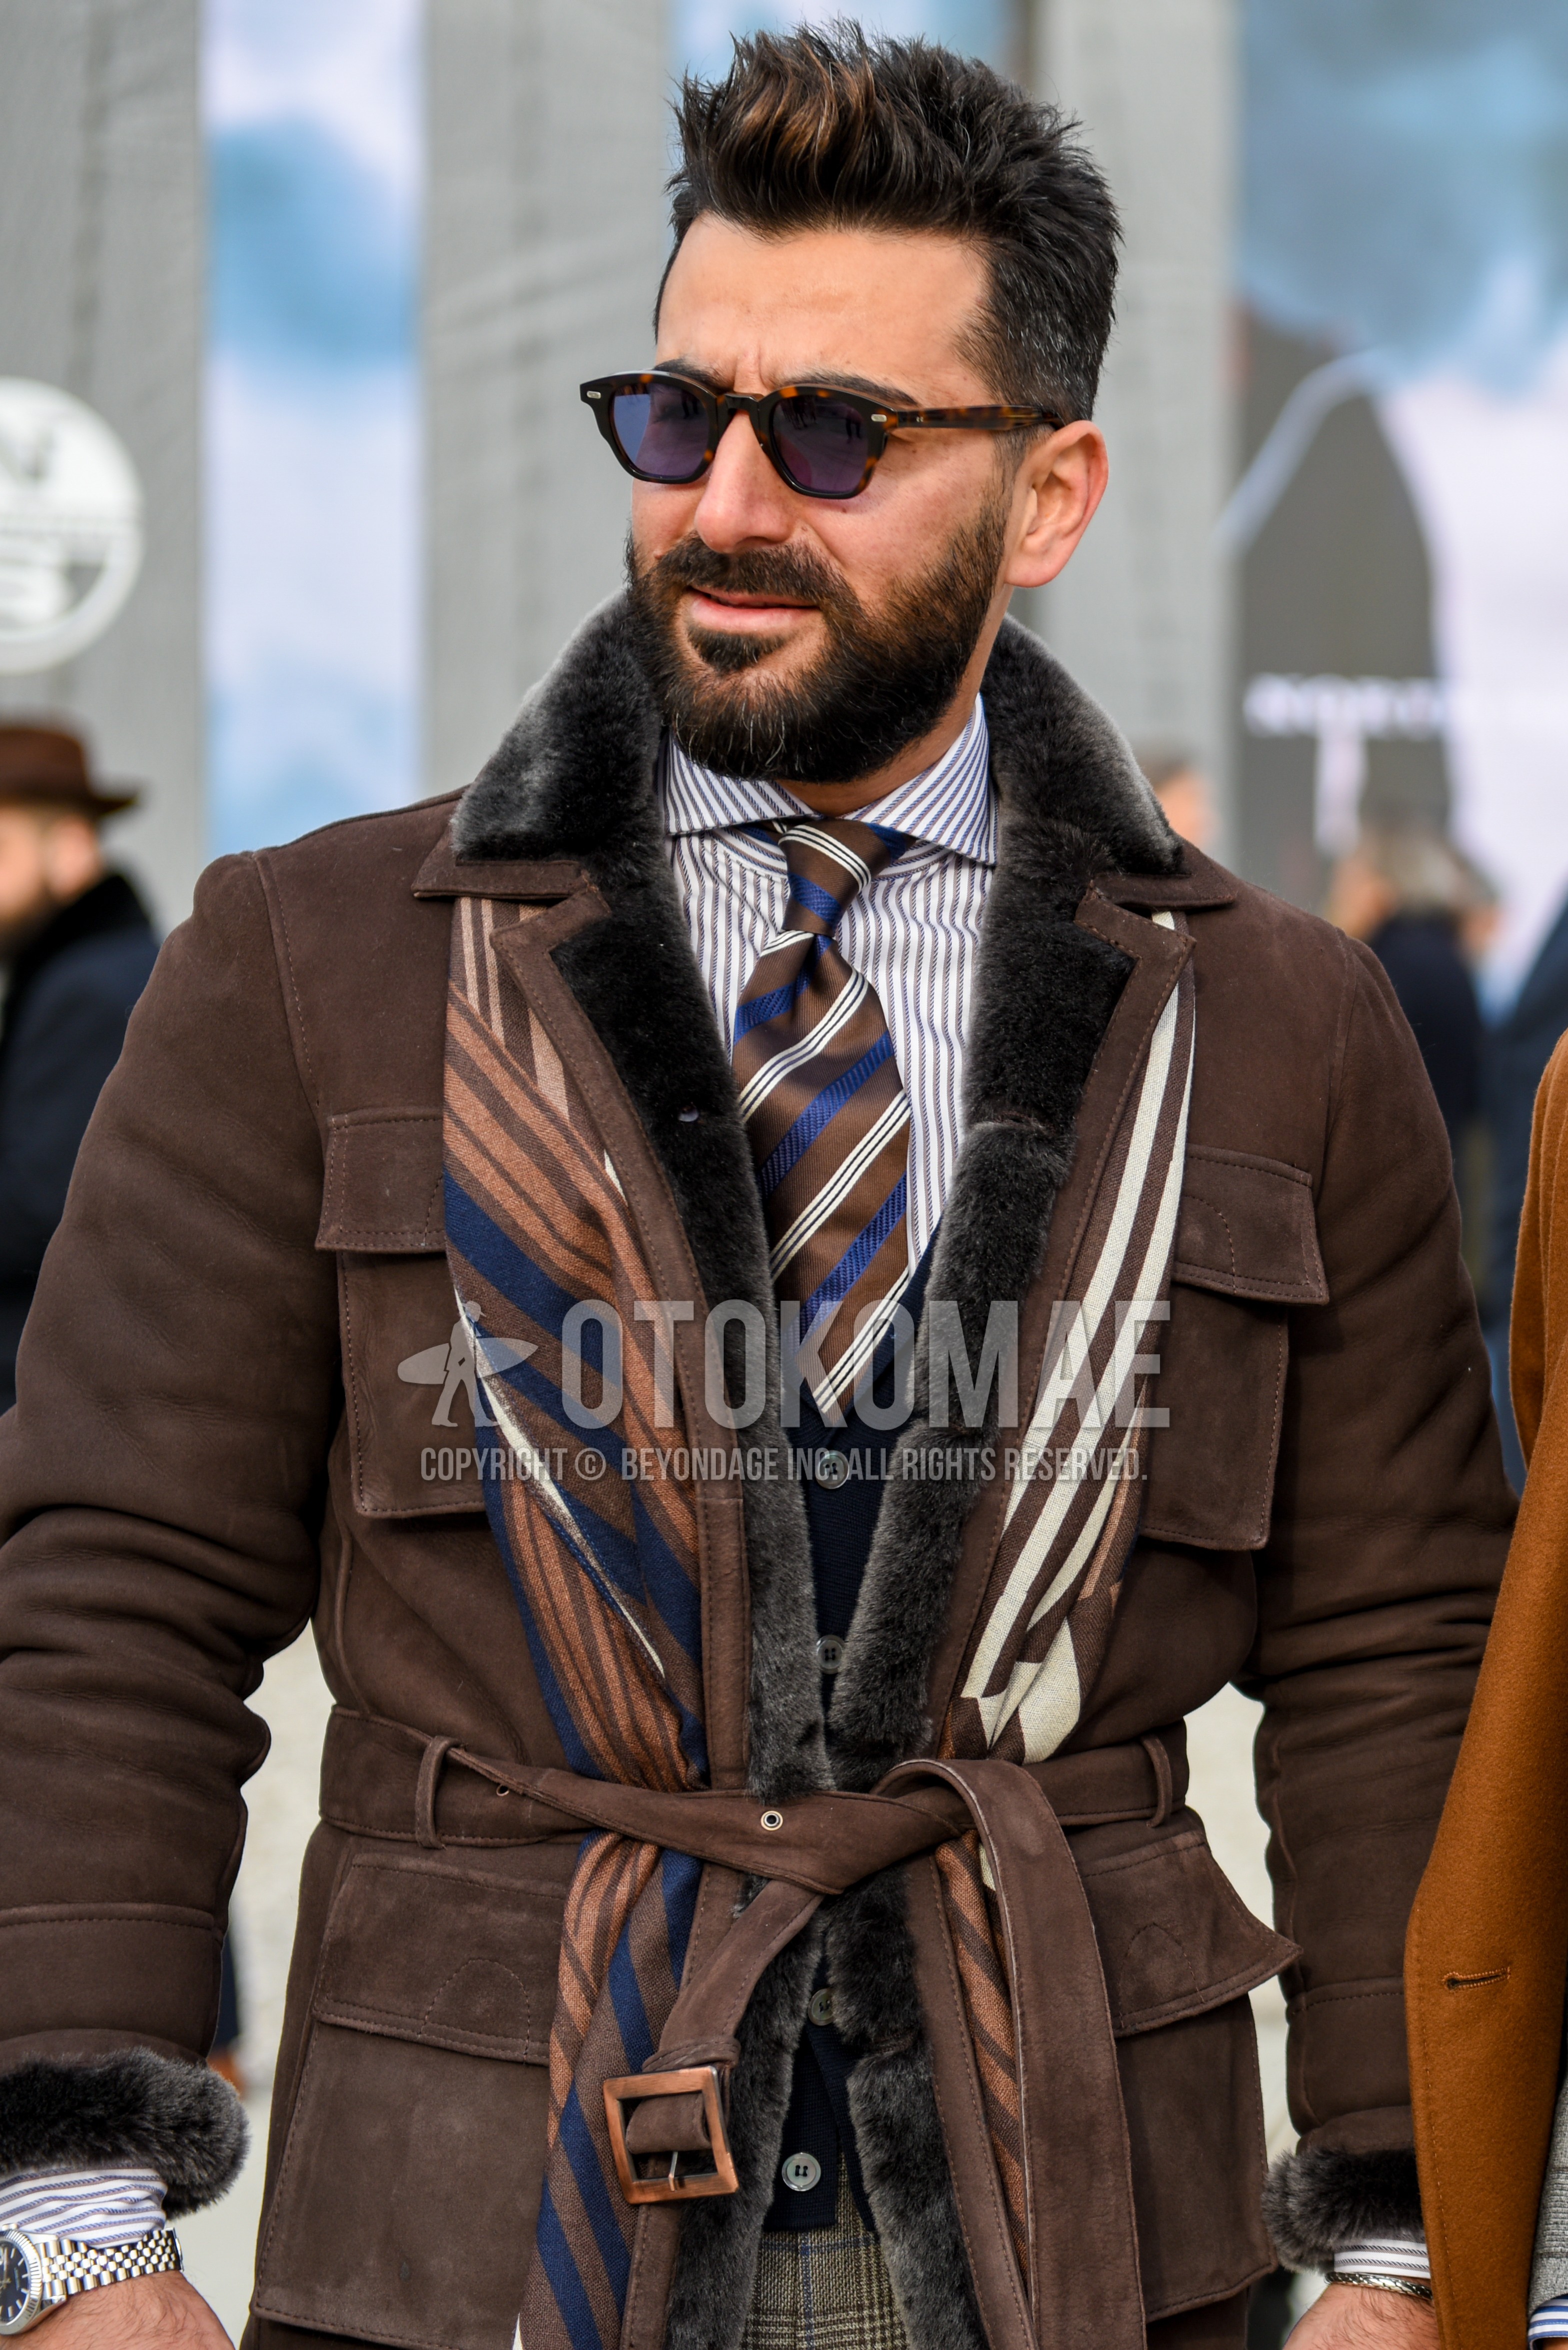 Men's autumn winter outfit with brown tortoiseshell sunglasses, multi-color scarf scarf, brown plain belted coat, white gray stripes shirt, black plain tailored jacket.